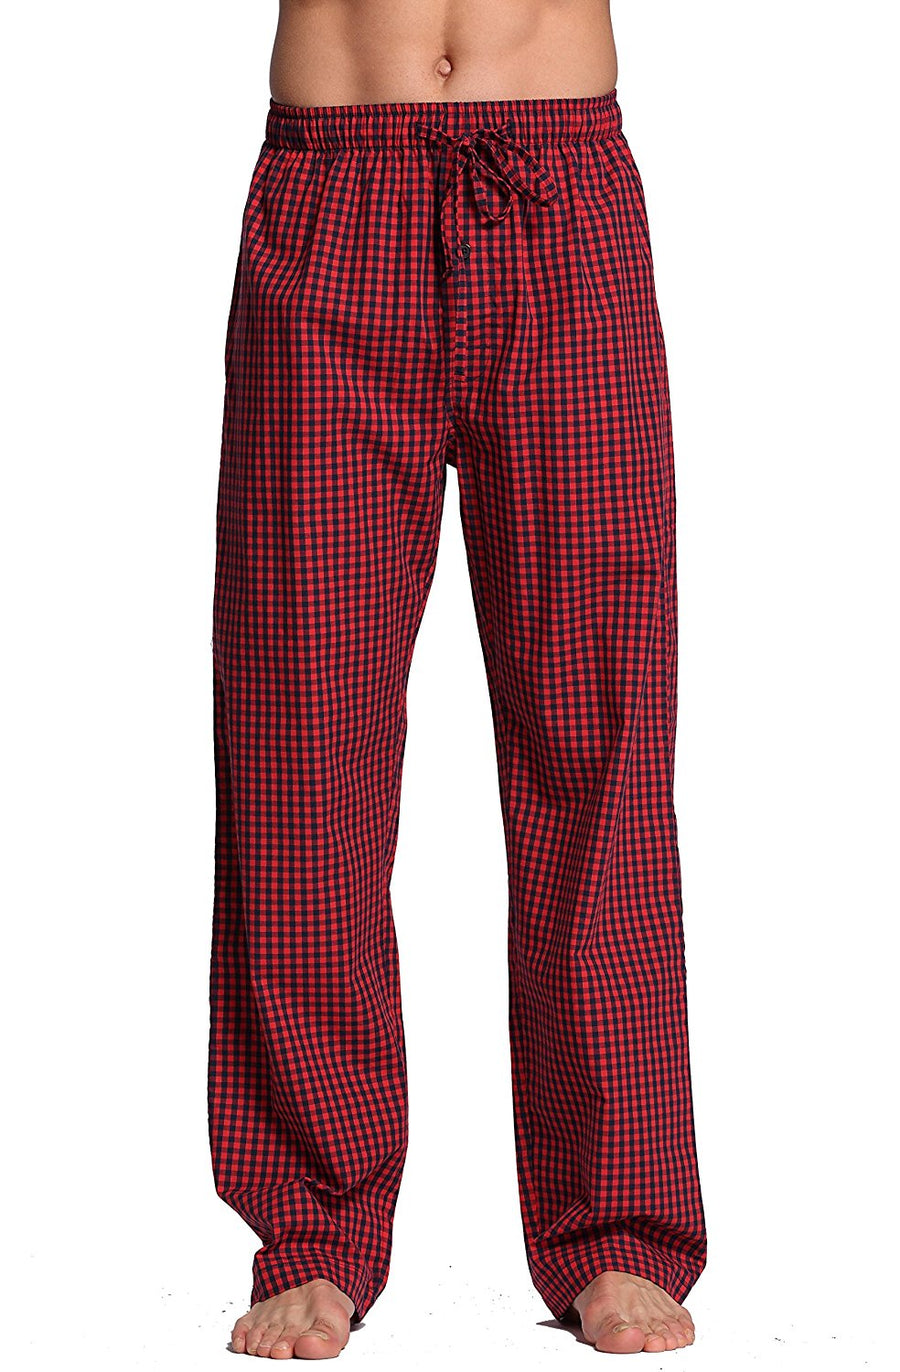 New Style Hot Sale Cotton Plaid Pajama Pants For Adluts Home